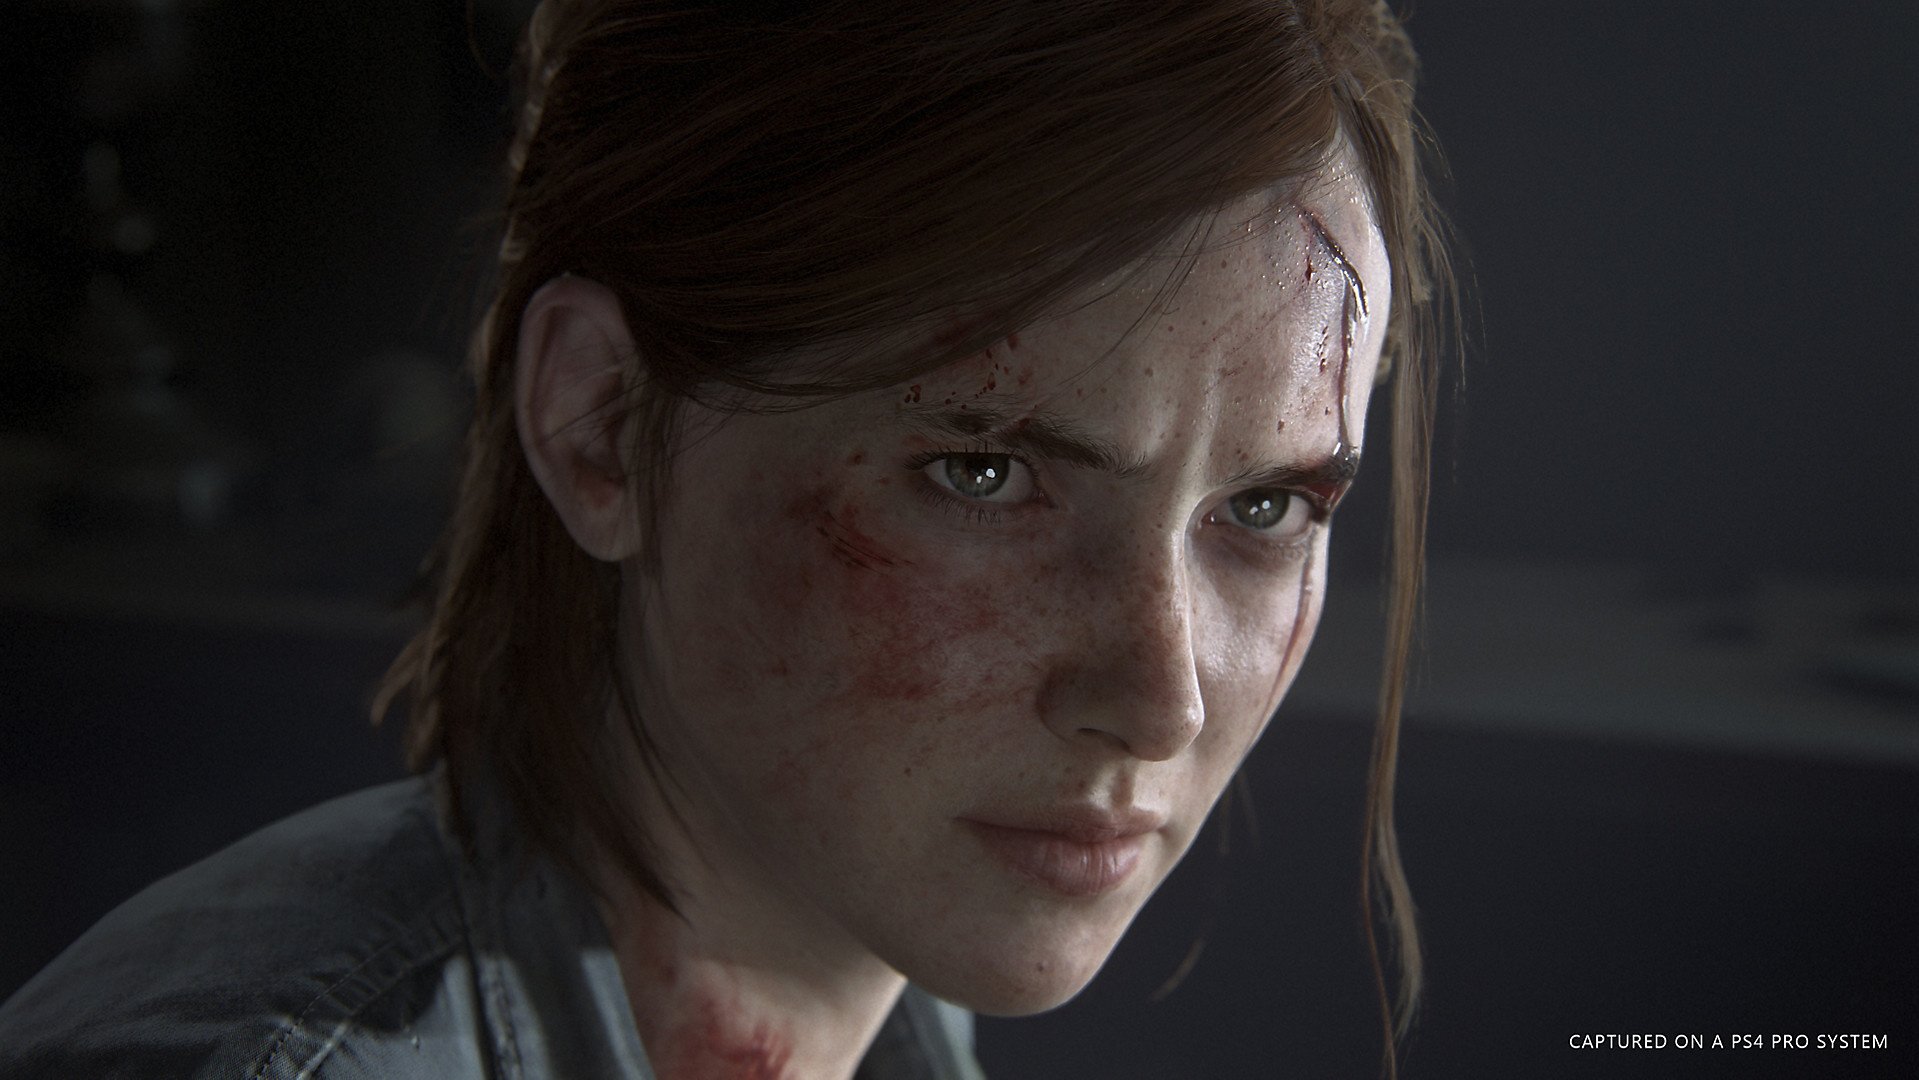 ps4 the last of us 1